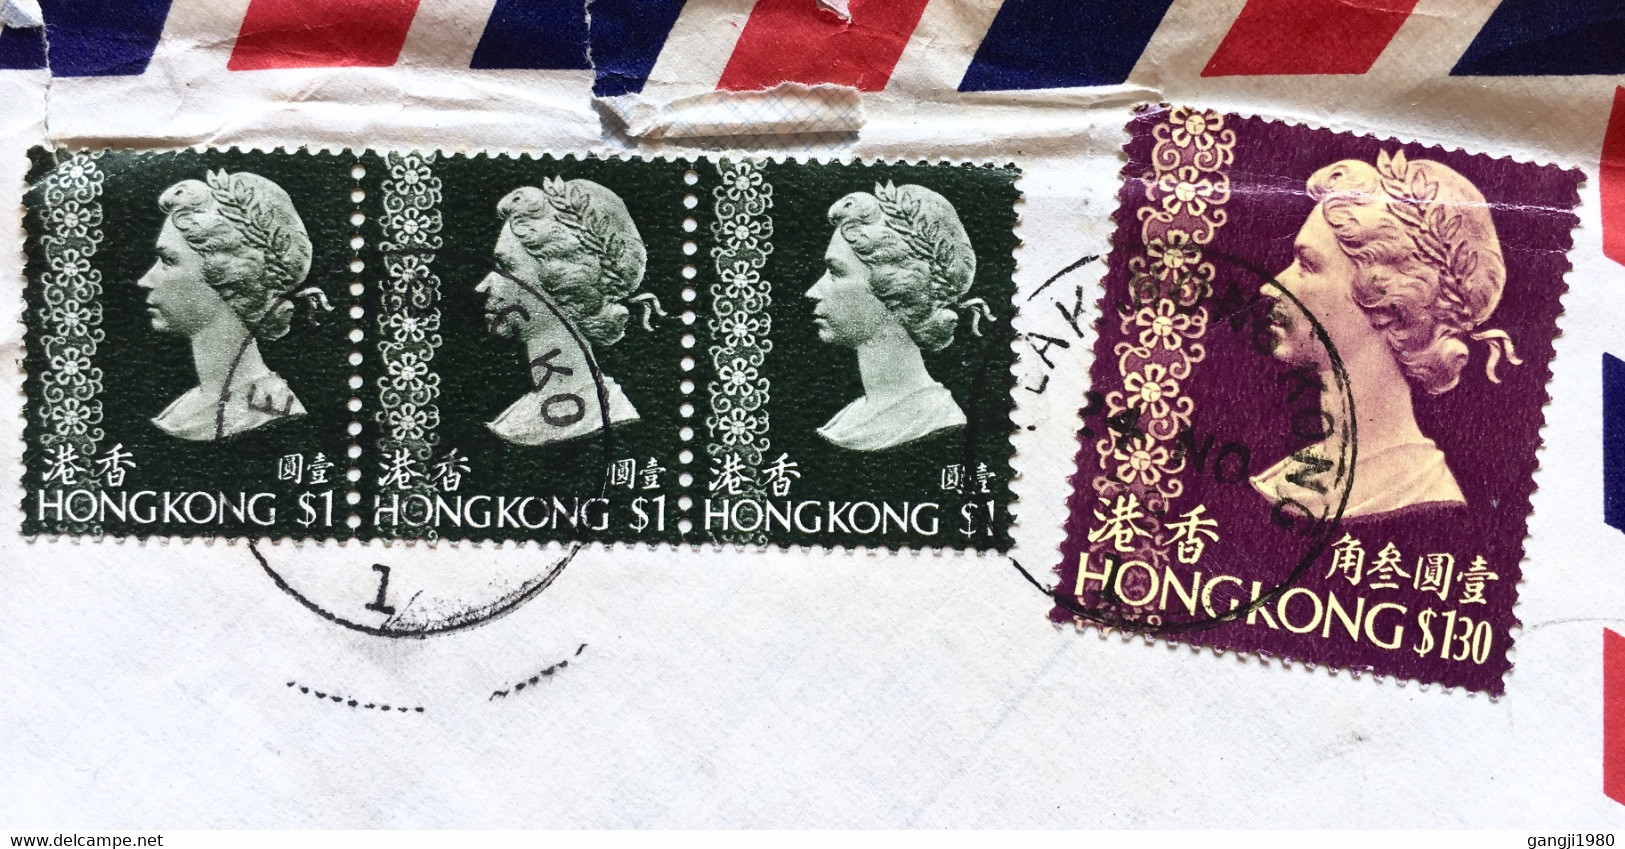 HONG KONG TO ENGLAND 1971, USED COVER, QUEEN 1$ 3 STAMPS, 1.30$ ONE STAMP, VIGNETTE EXPRESS LABEL, LAKE HONG KONG CANCEL - Storia Postale